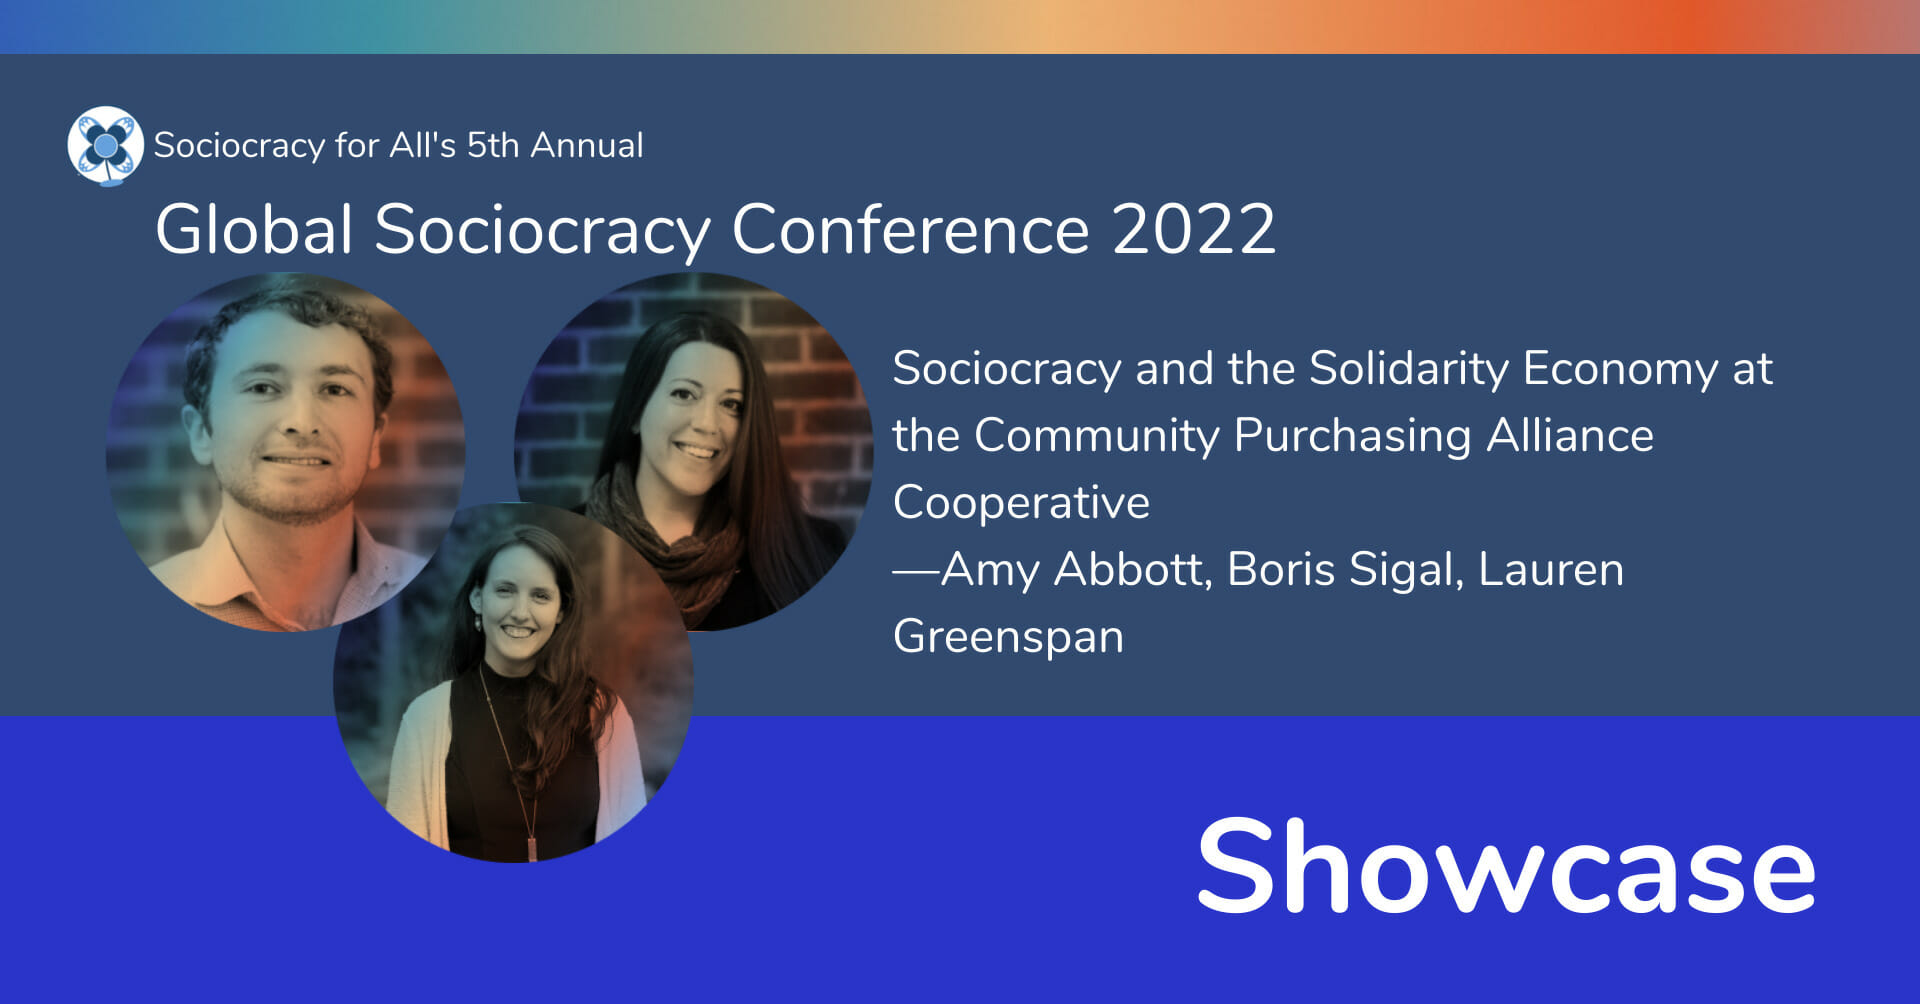 Sociocracy and the Solidarity Economy at the Community Purchasing Alliance Cooperative —Amy Abbott, Boris Sigal, Lauren Greenspan